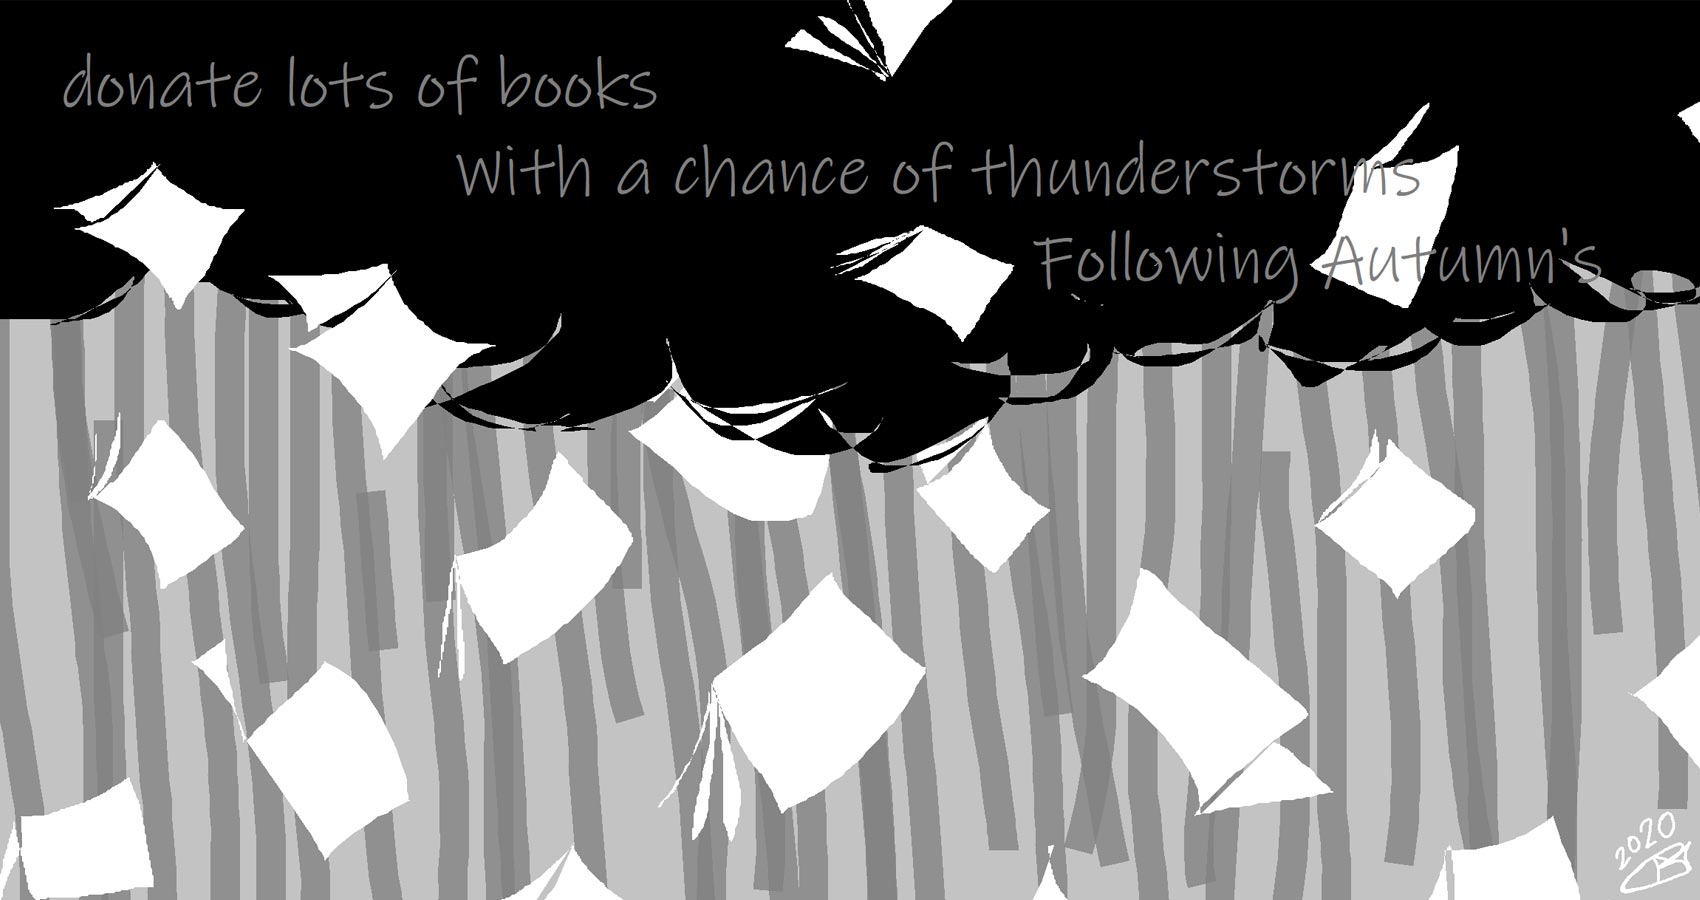 Thunderstorms With a Chance of Books by Robyn MacKinnon